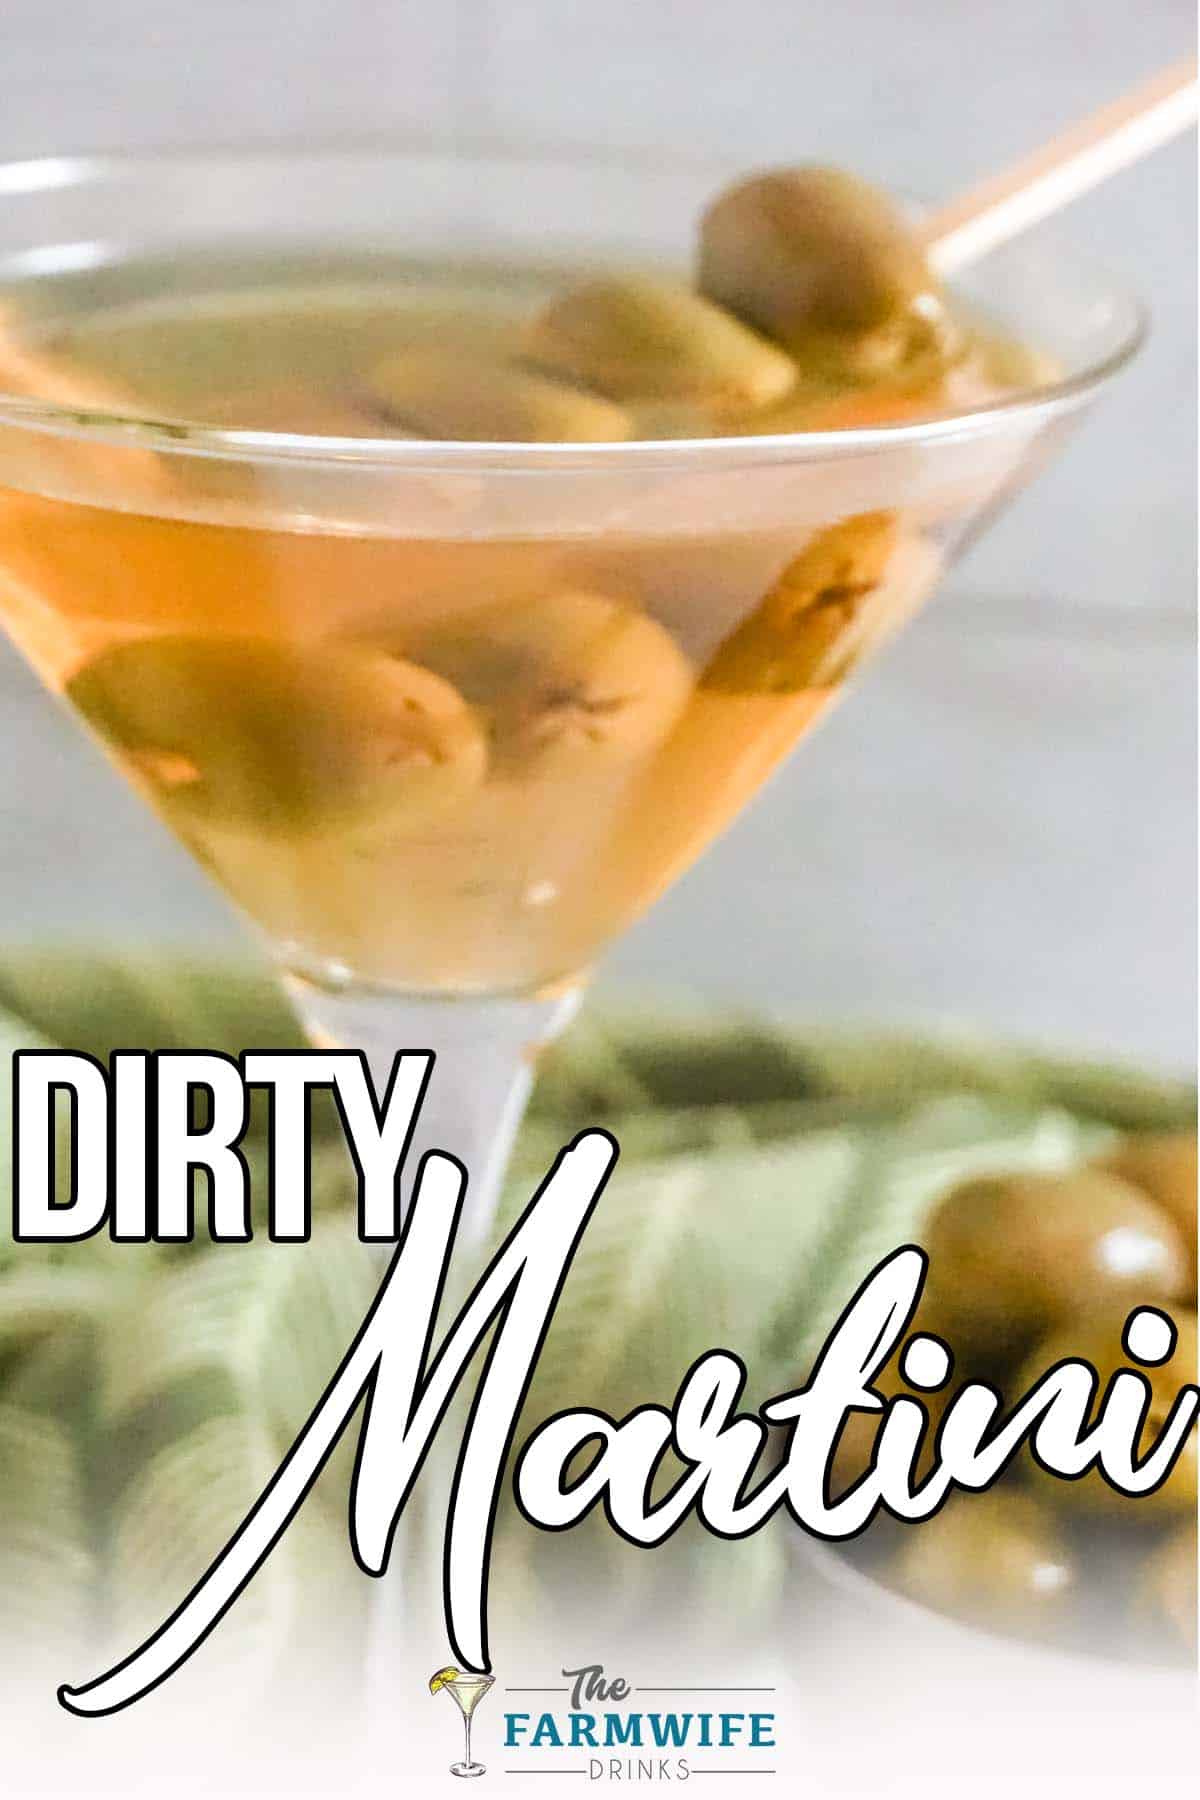 olive martini with text which reads dirty martini cocktail